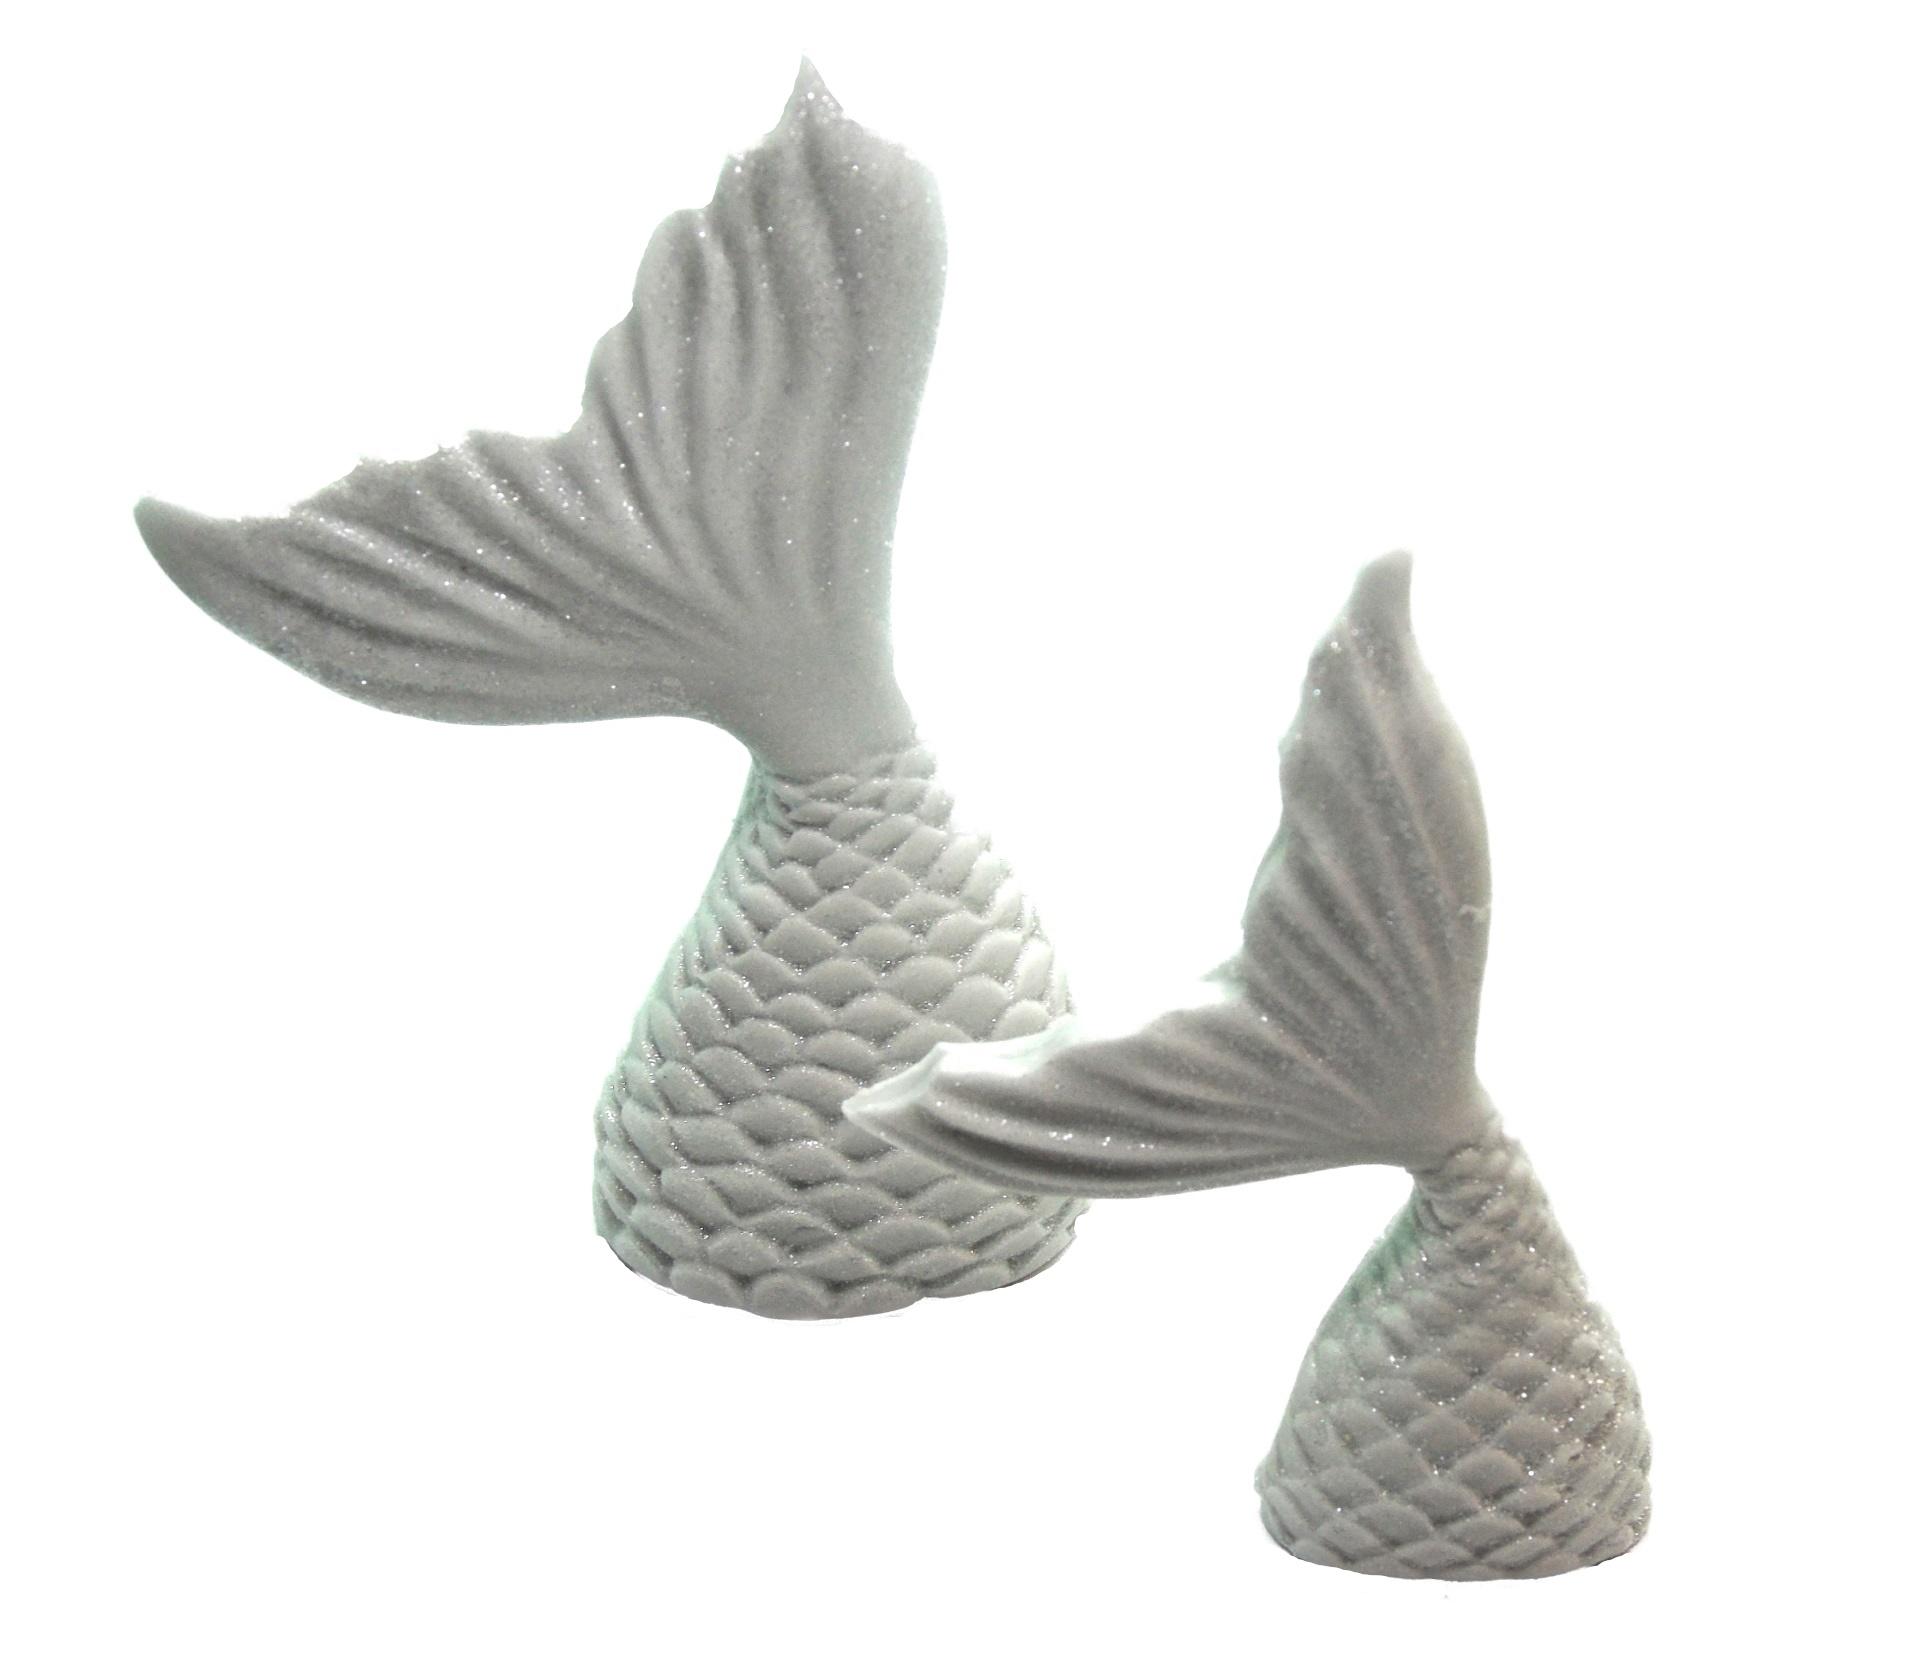 2 Silver Edible Mermaid Tails Large & Small Vegan Birthday Cake Toppers